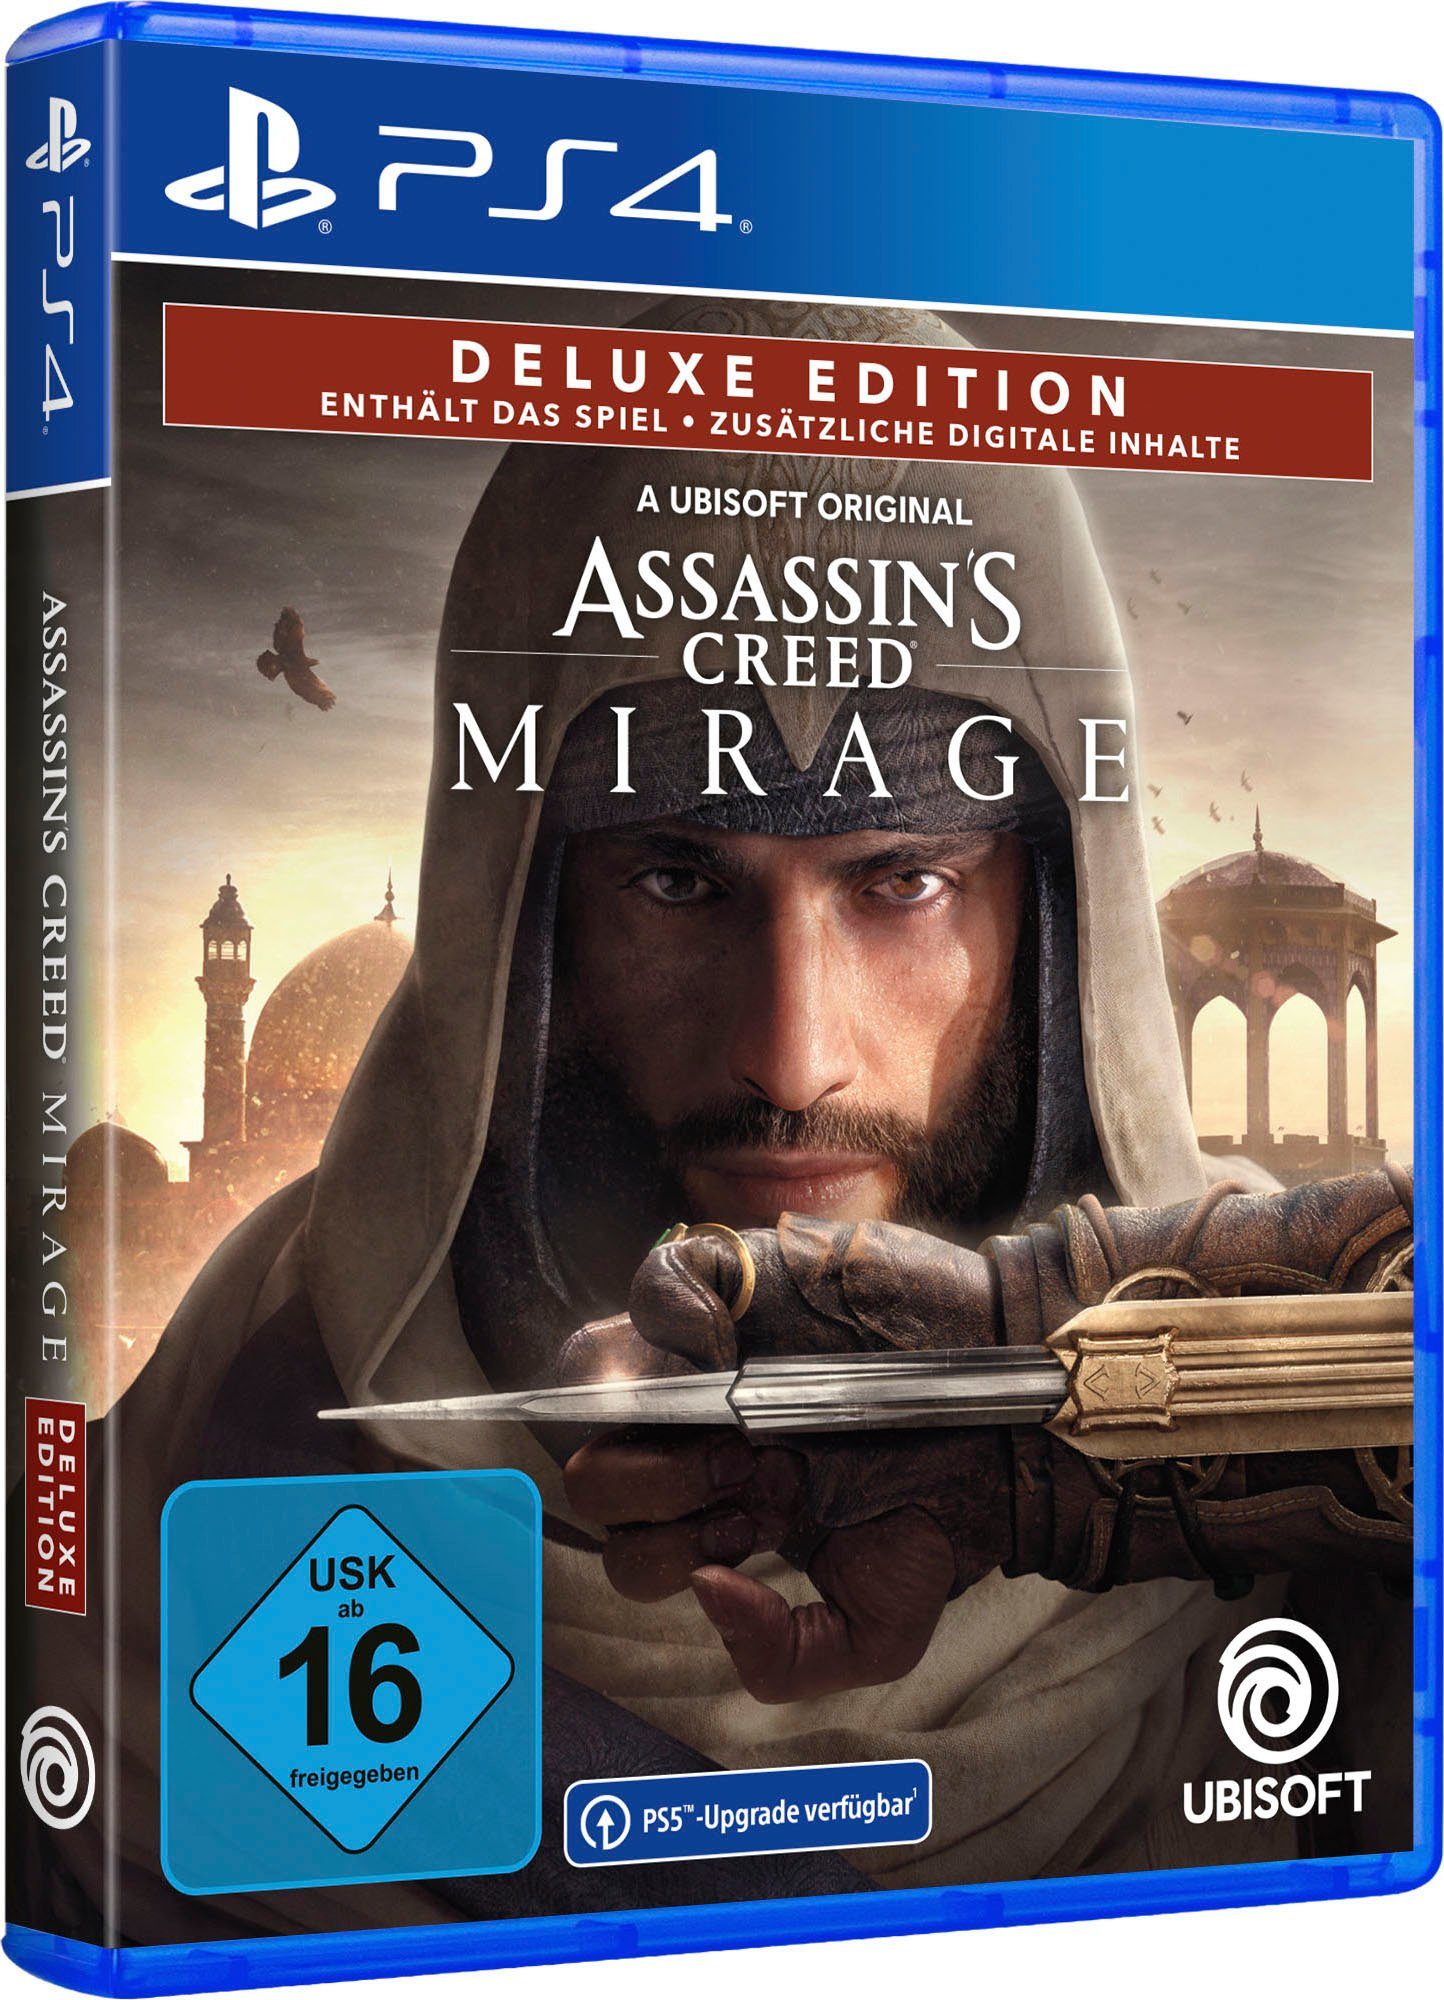 UBISOFT Assassin's Creed Mirage Deluxe Edition - (kostenloses Upgrade auf PS5) PlayStation 4